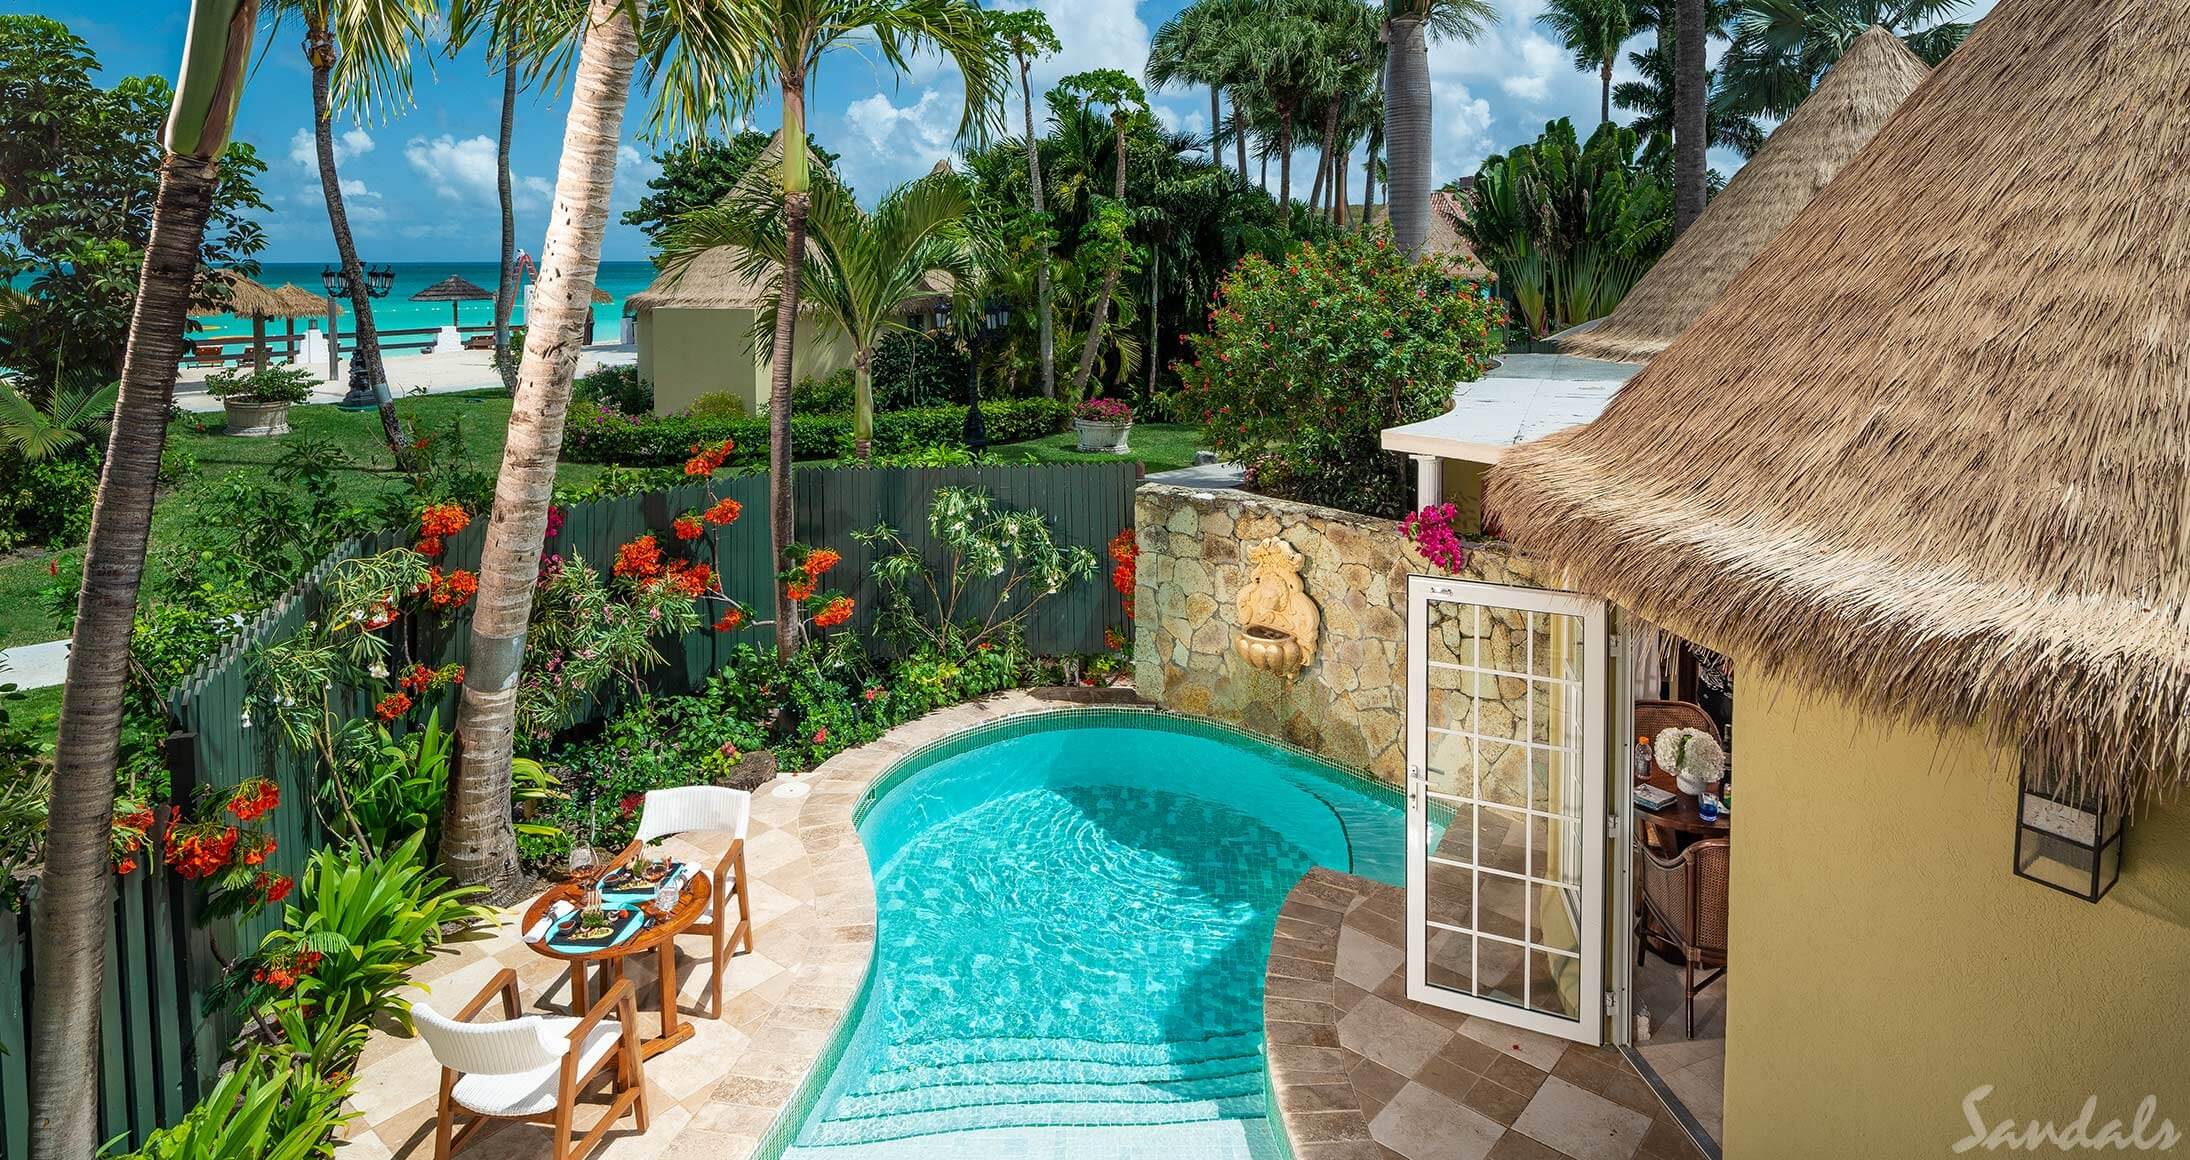 Private plunge pool in a garden at Sandals Grande Antigua. 